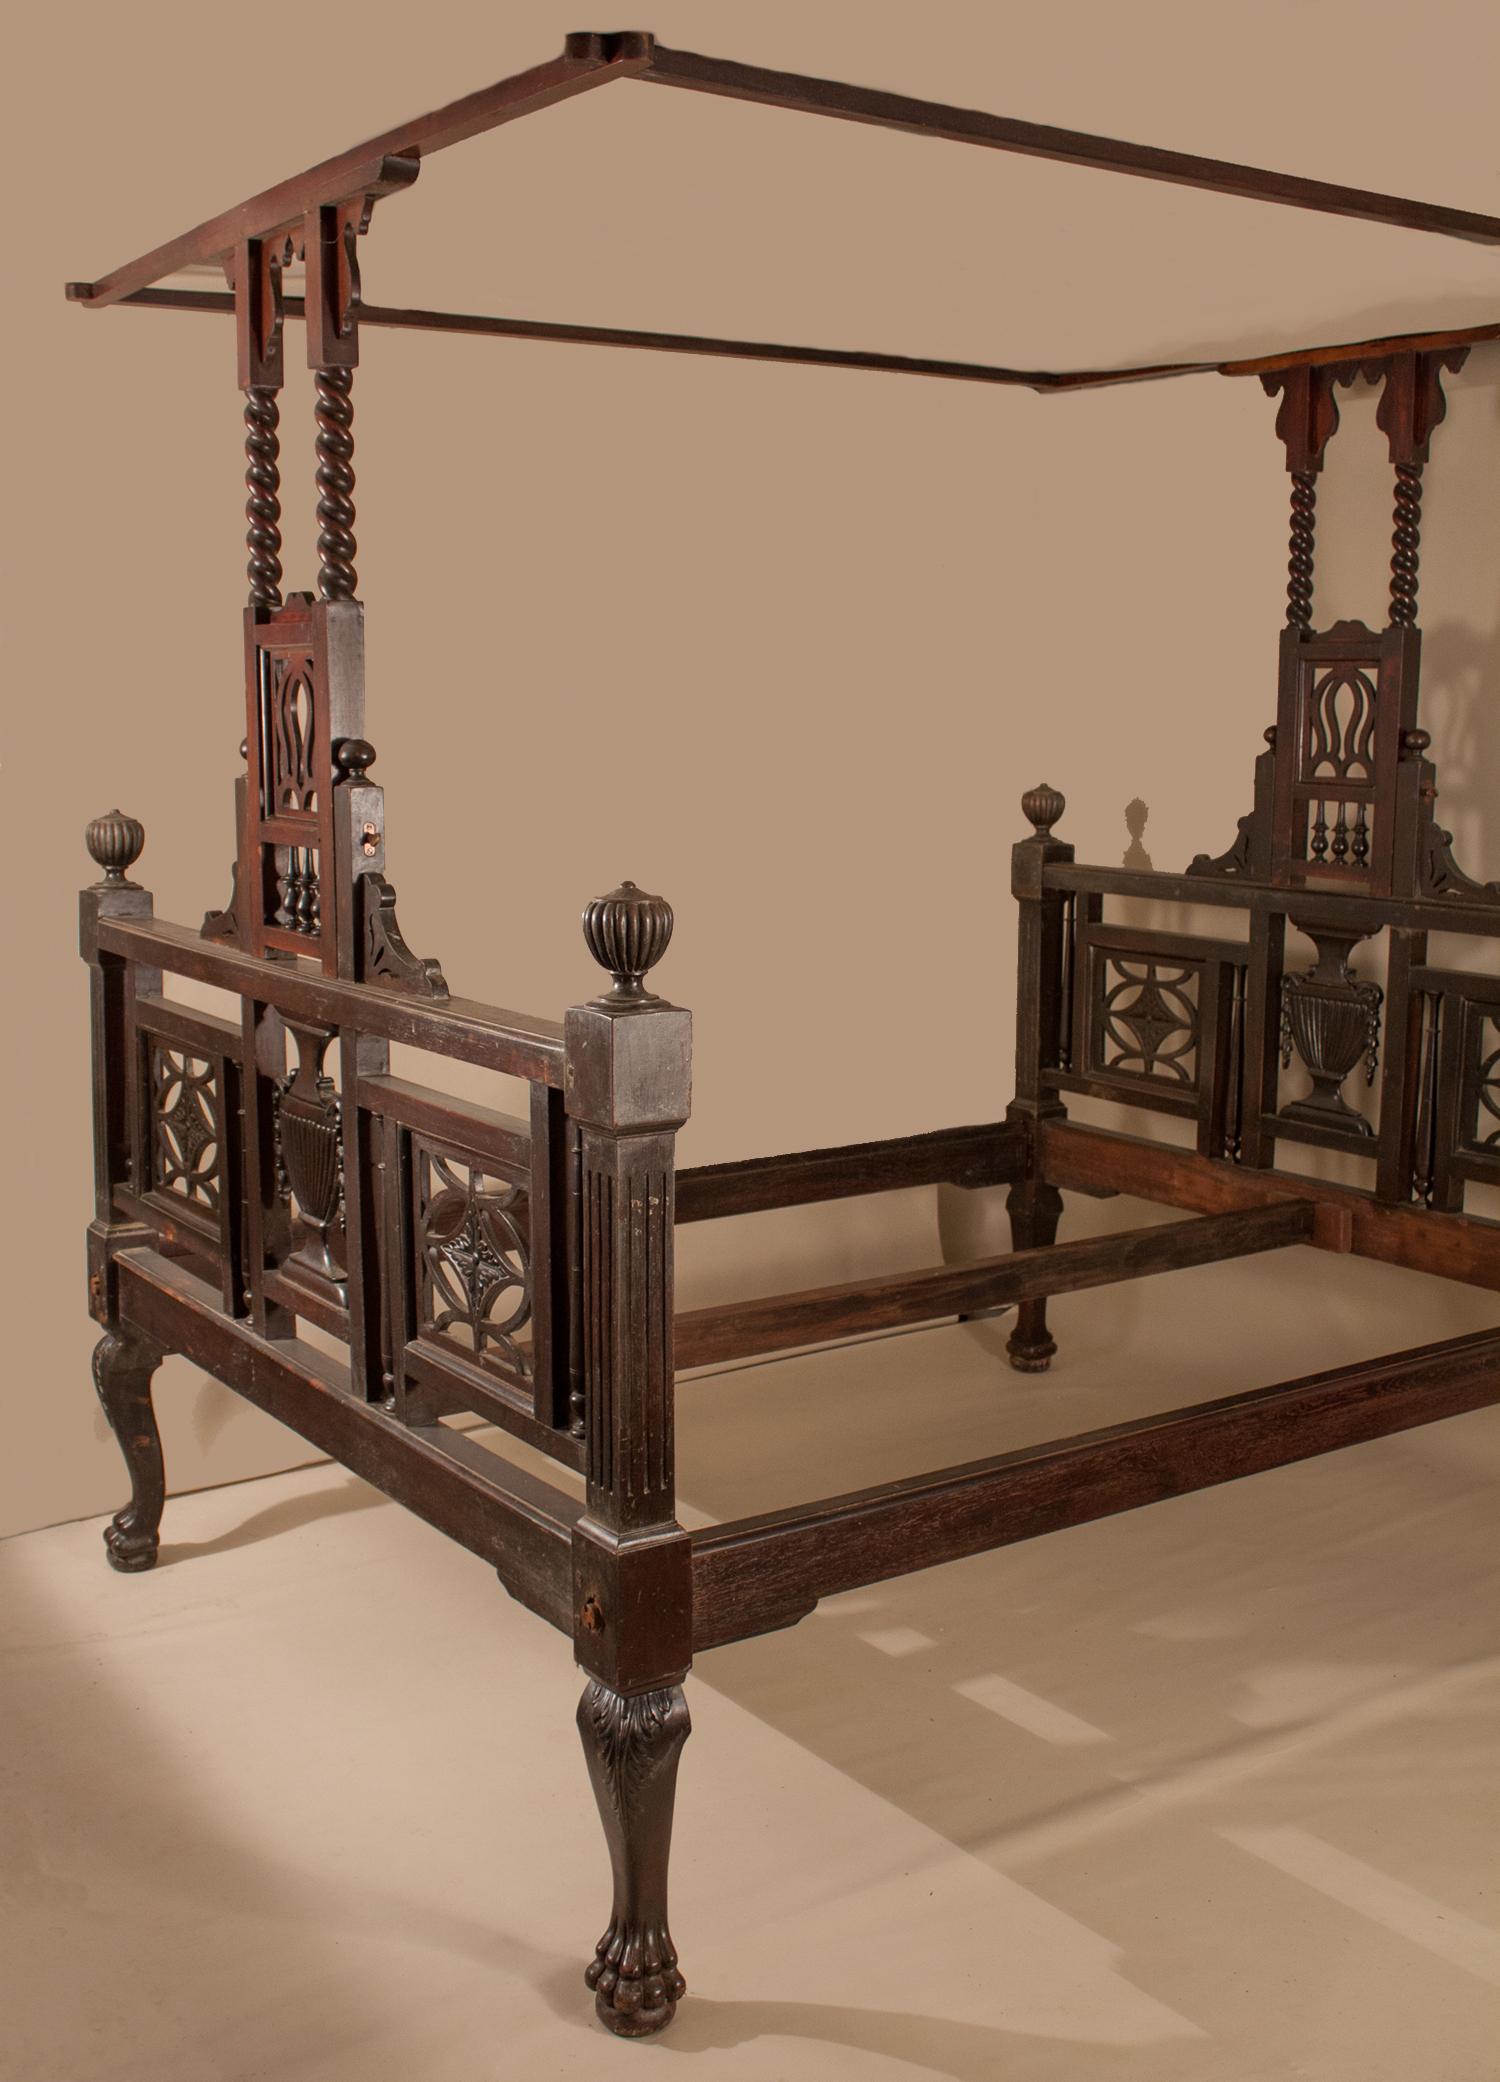 This circa 1900 hand-carved mahogany tester bed is a treasure from Kolkata, once the capital of British India. The head- and footboards are mirror images, with Grecian urns carved in the center  and panes with carved flowers on both sides. The